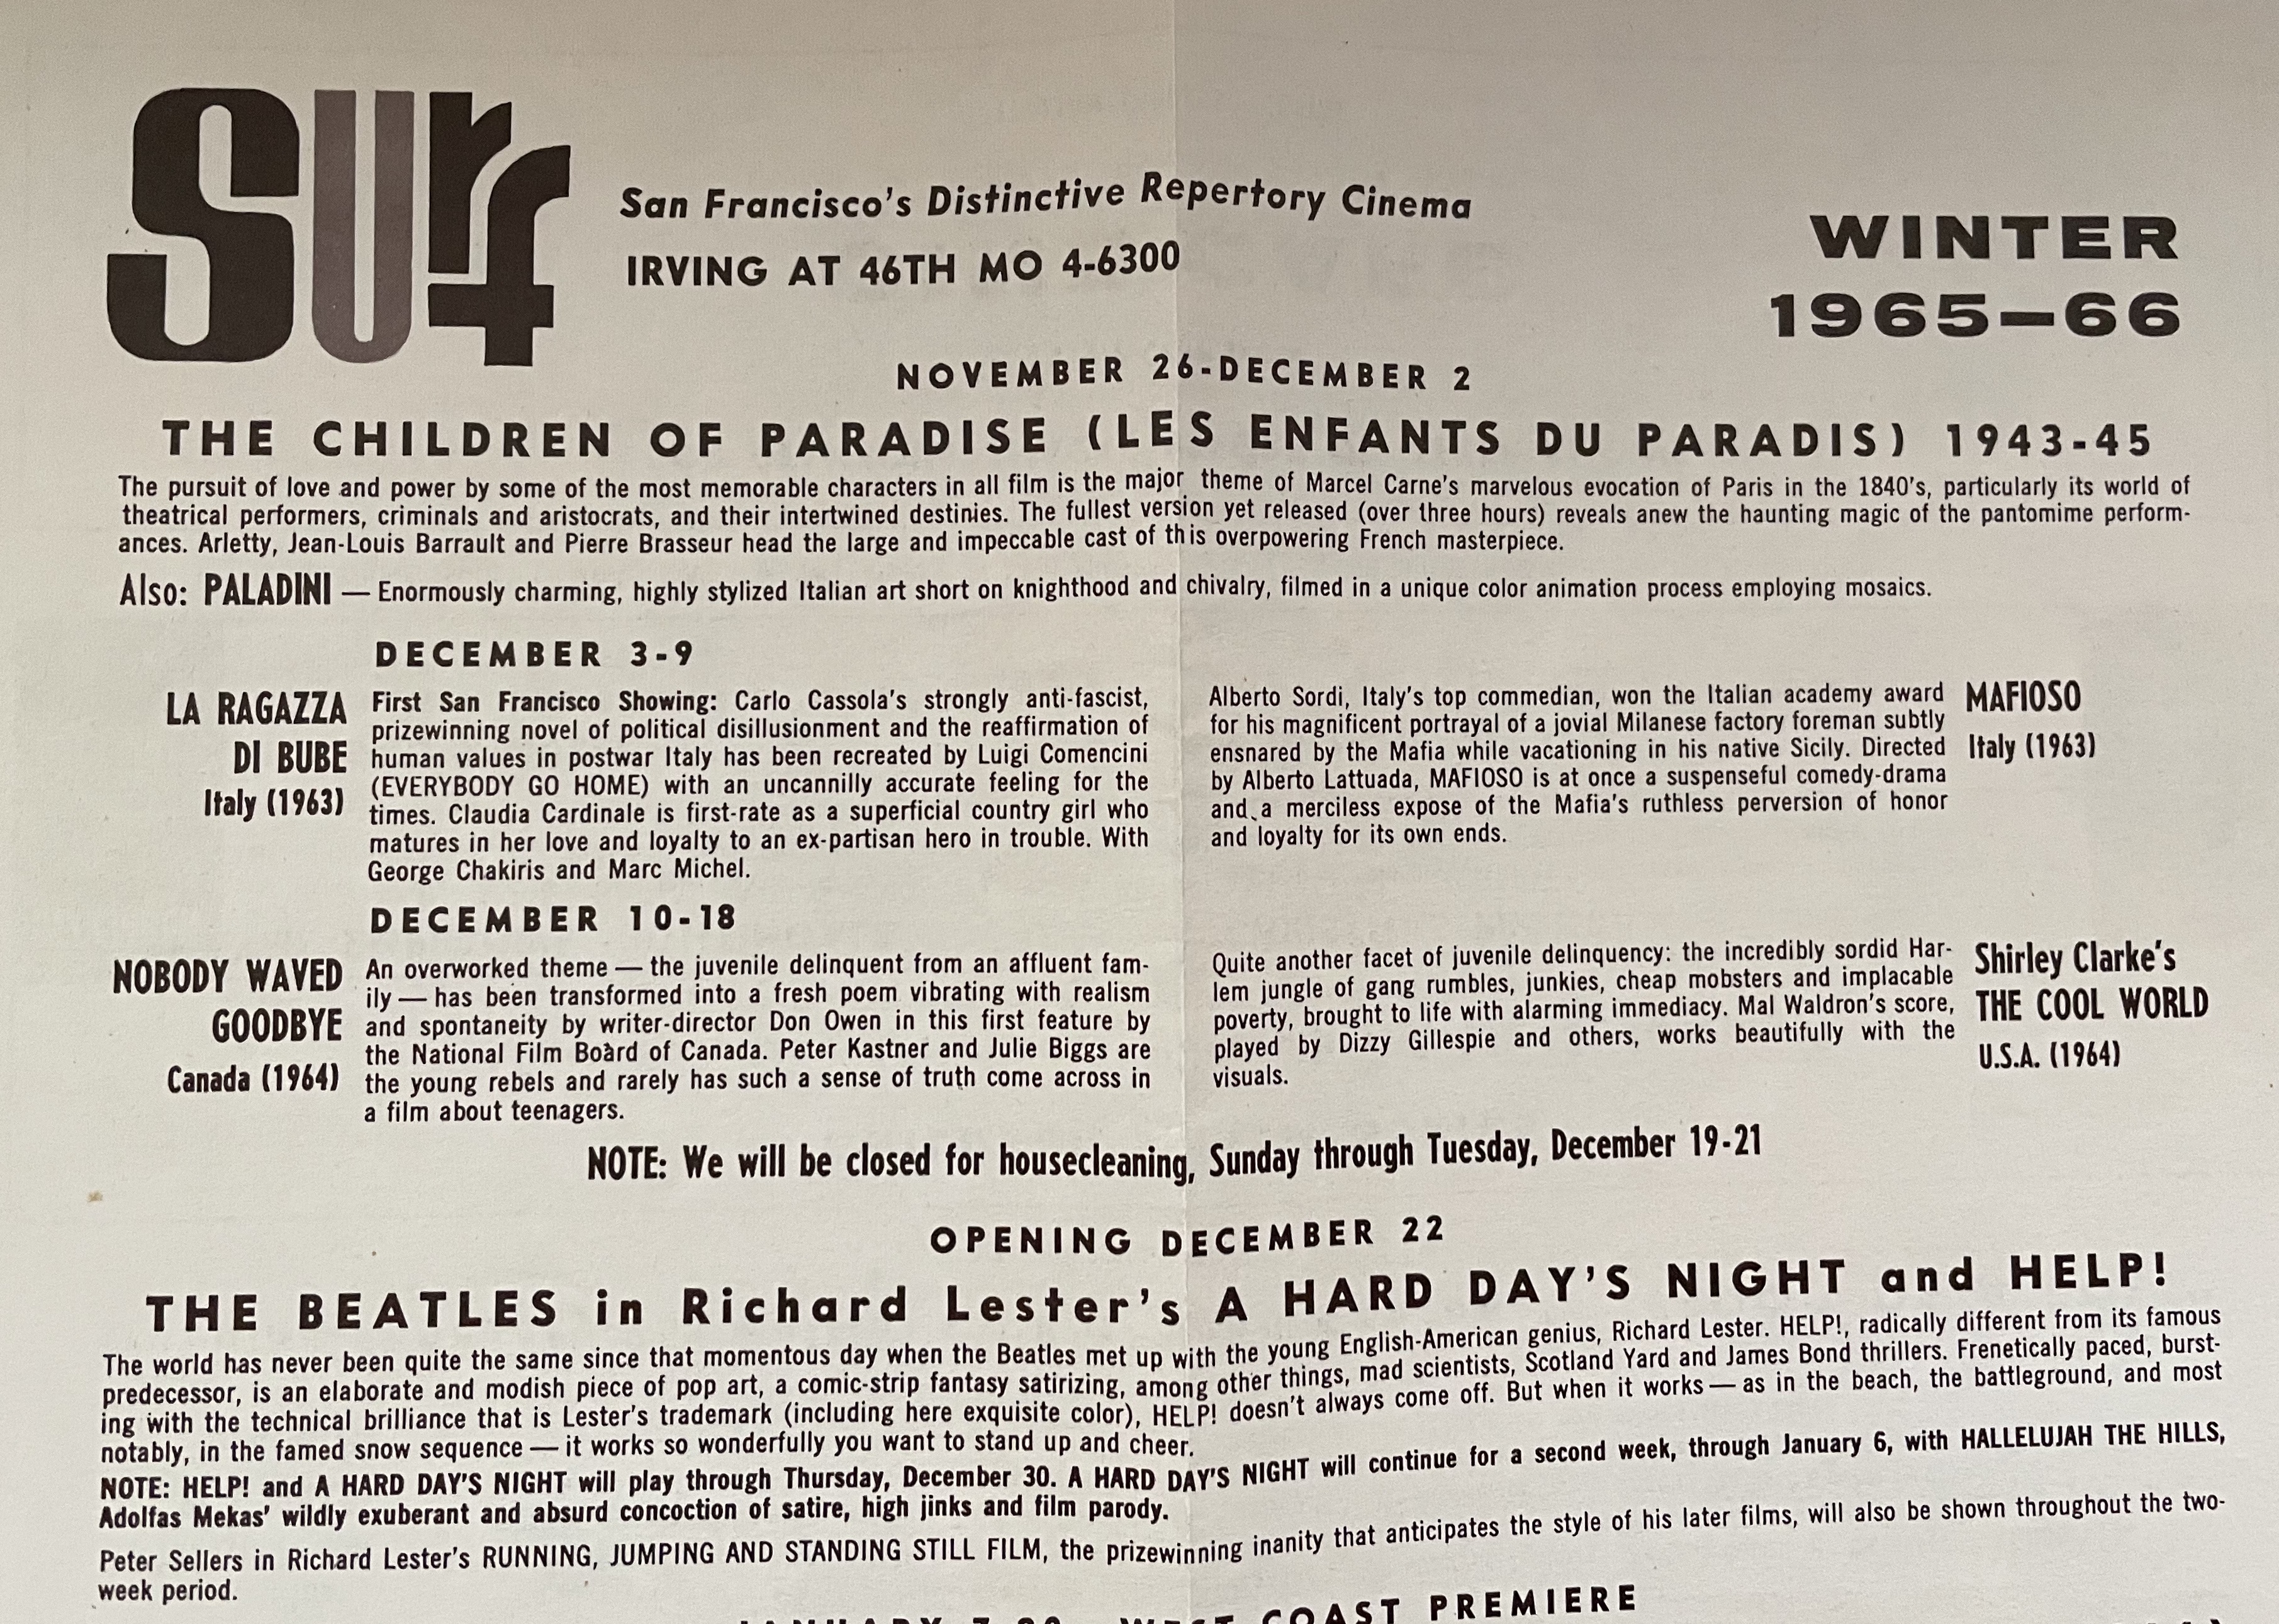 1965-66 Winter screening listings for the Surf Theatre in San Francisco